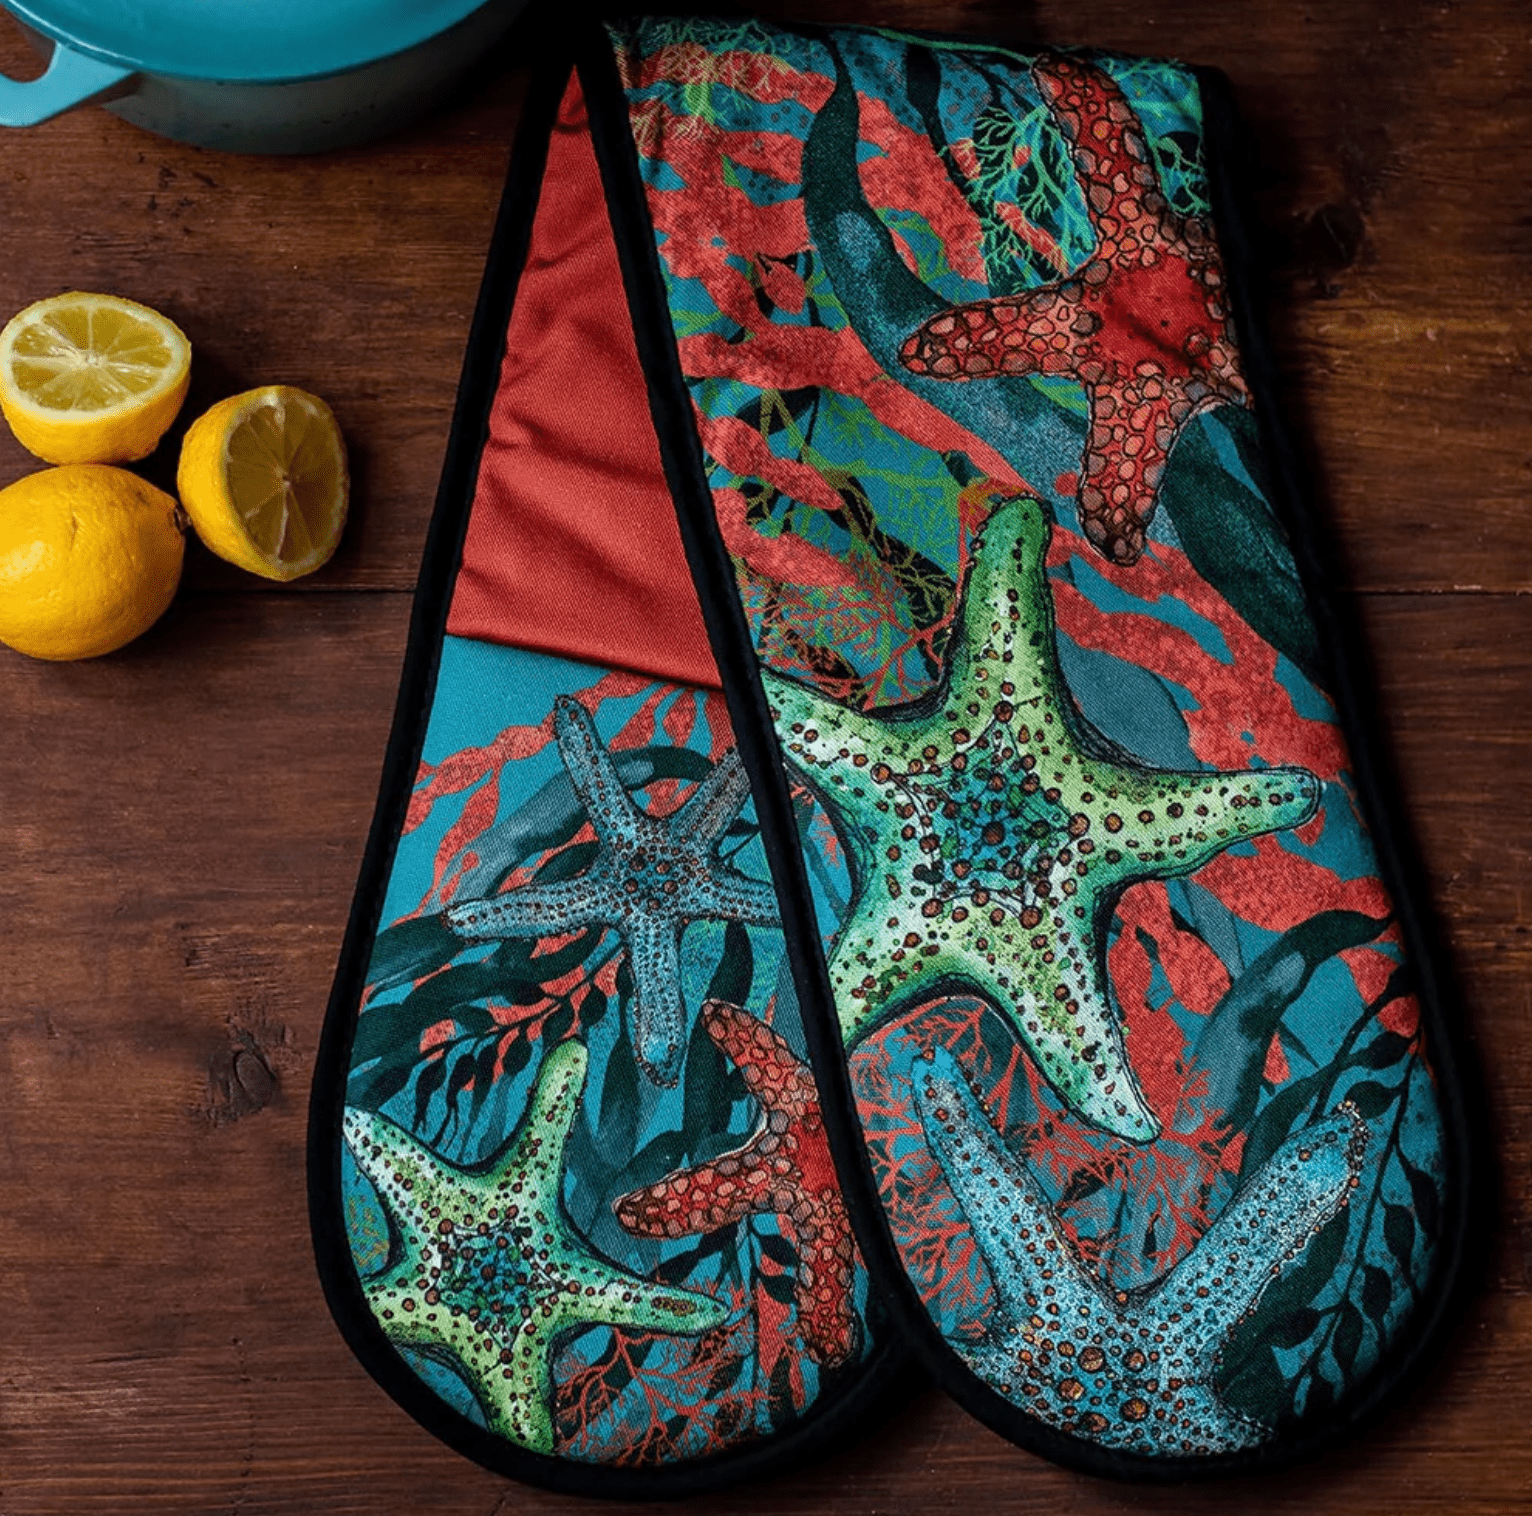 Quality Oven Gloves Starfish Design by Dollyhotdogs